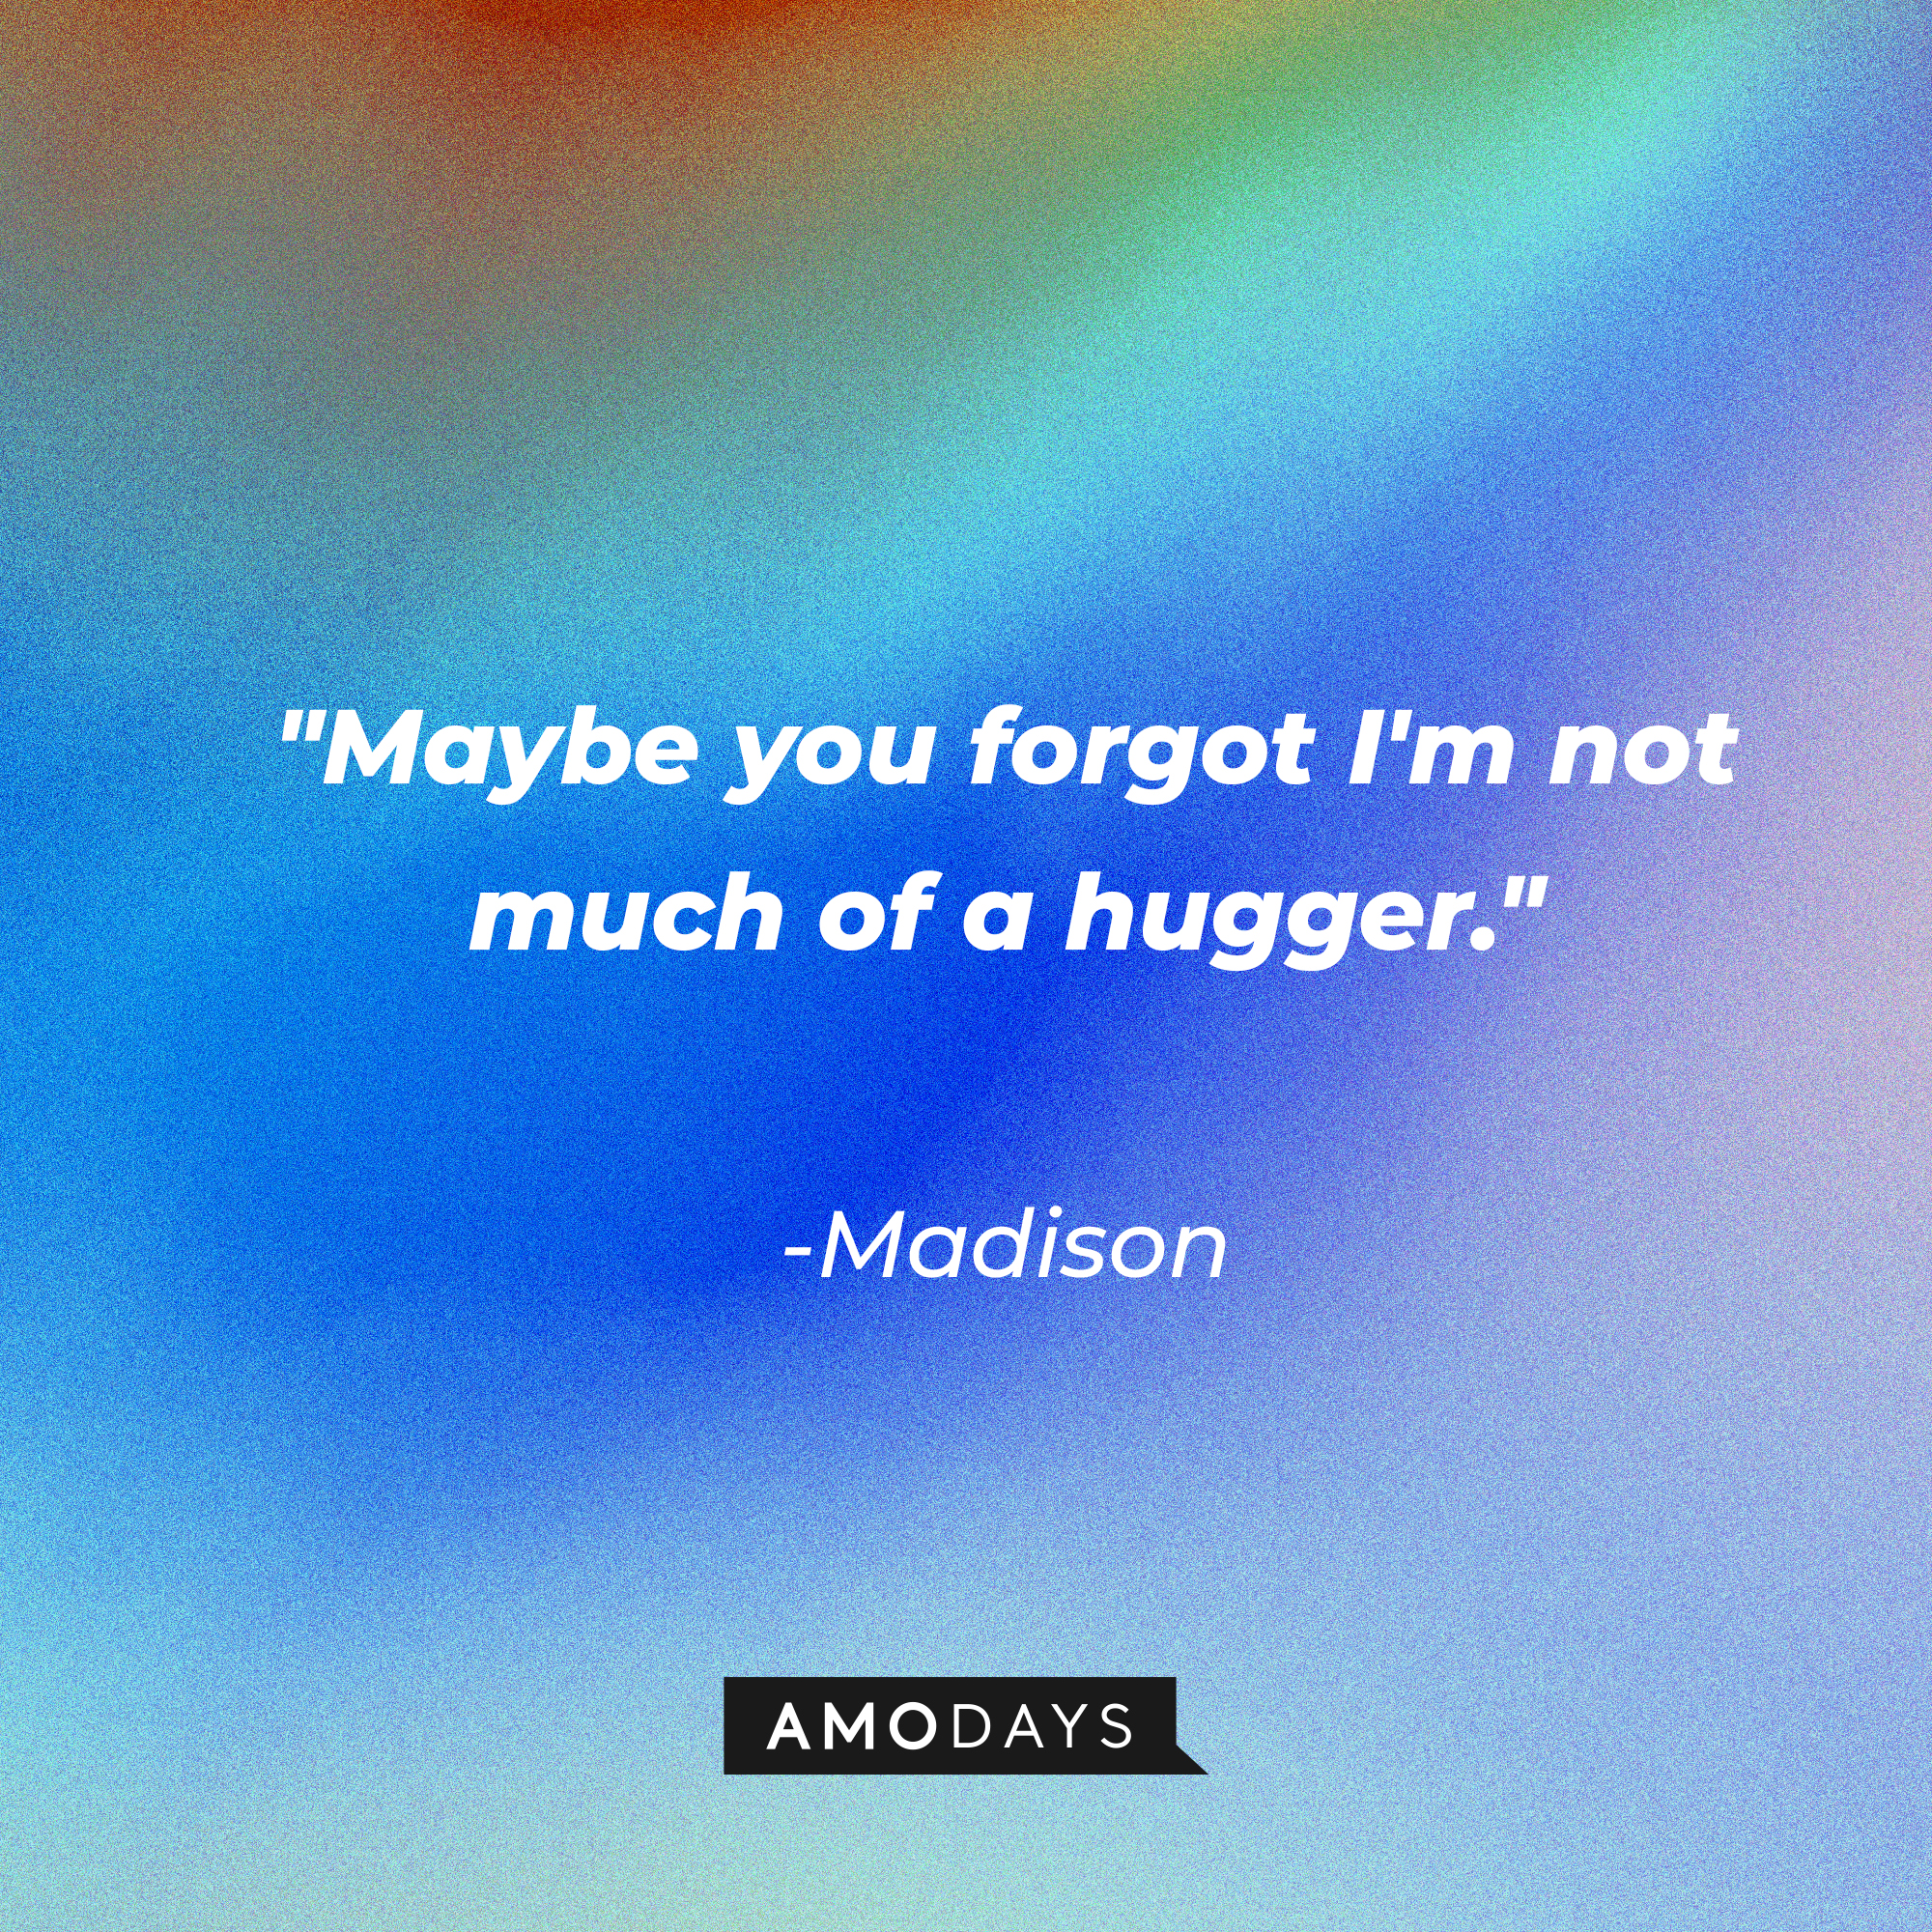 Madison’s quote: "Maybe you forgot I'm not much of a hugger."  | Source: AmoDays